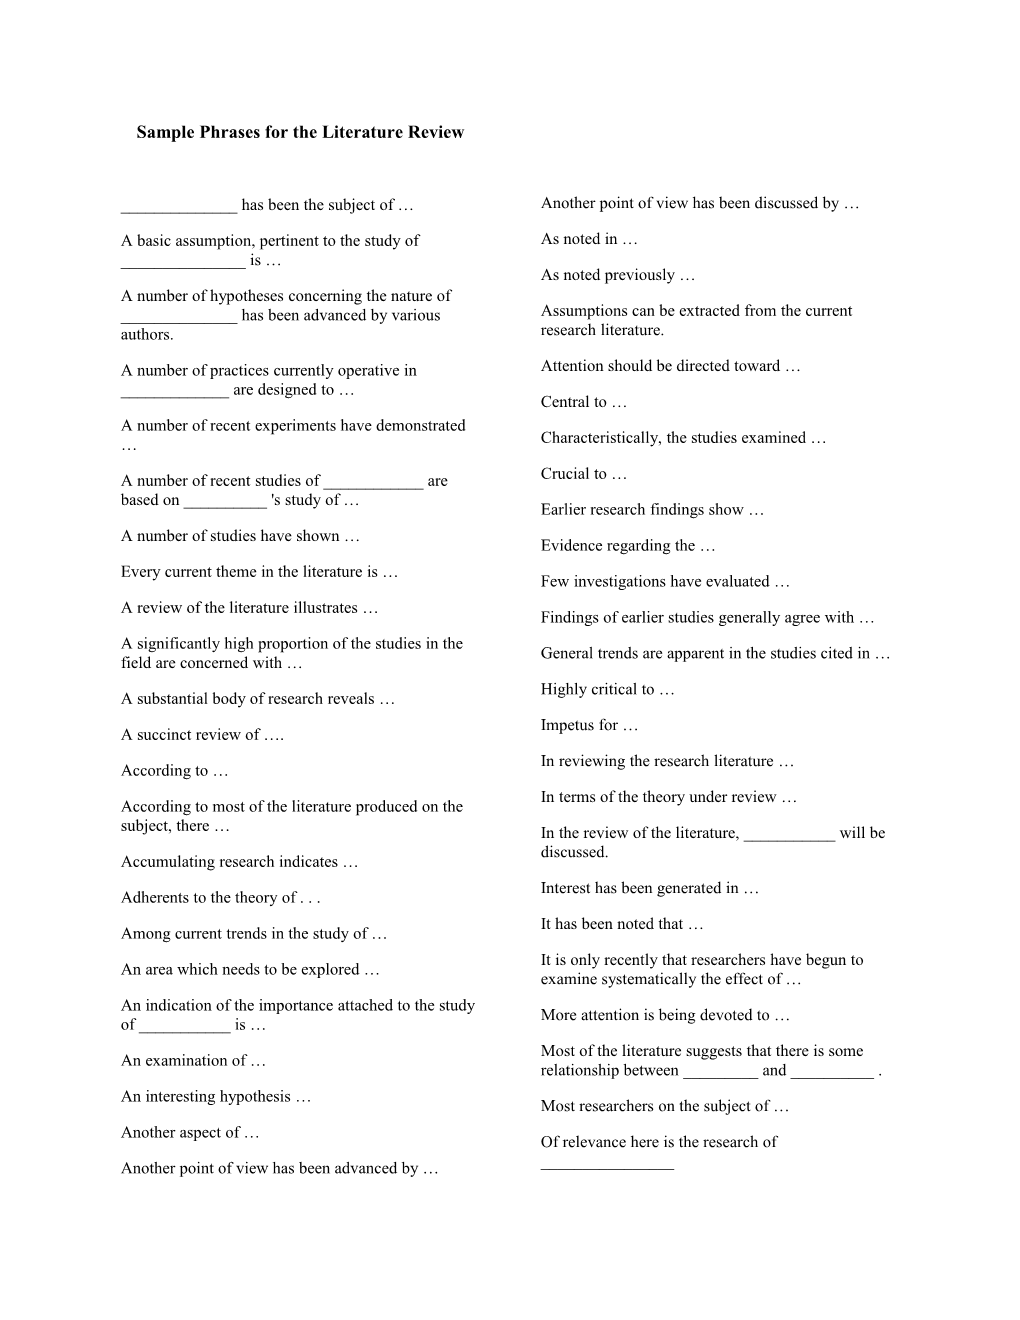 Sample Phrases for the Literature Review